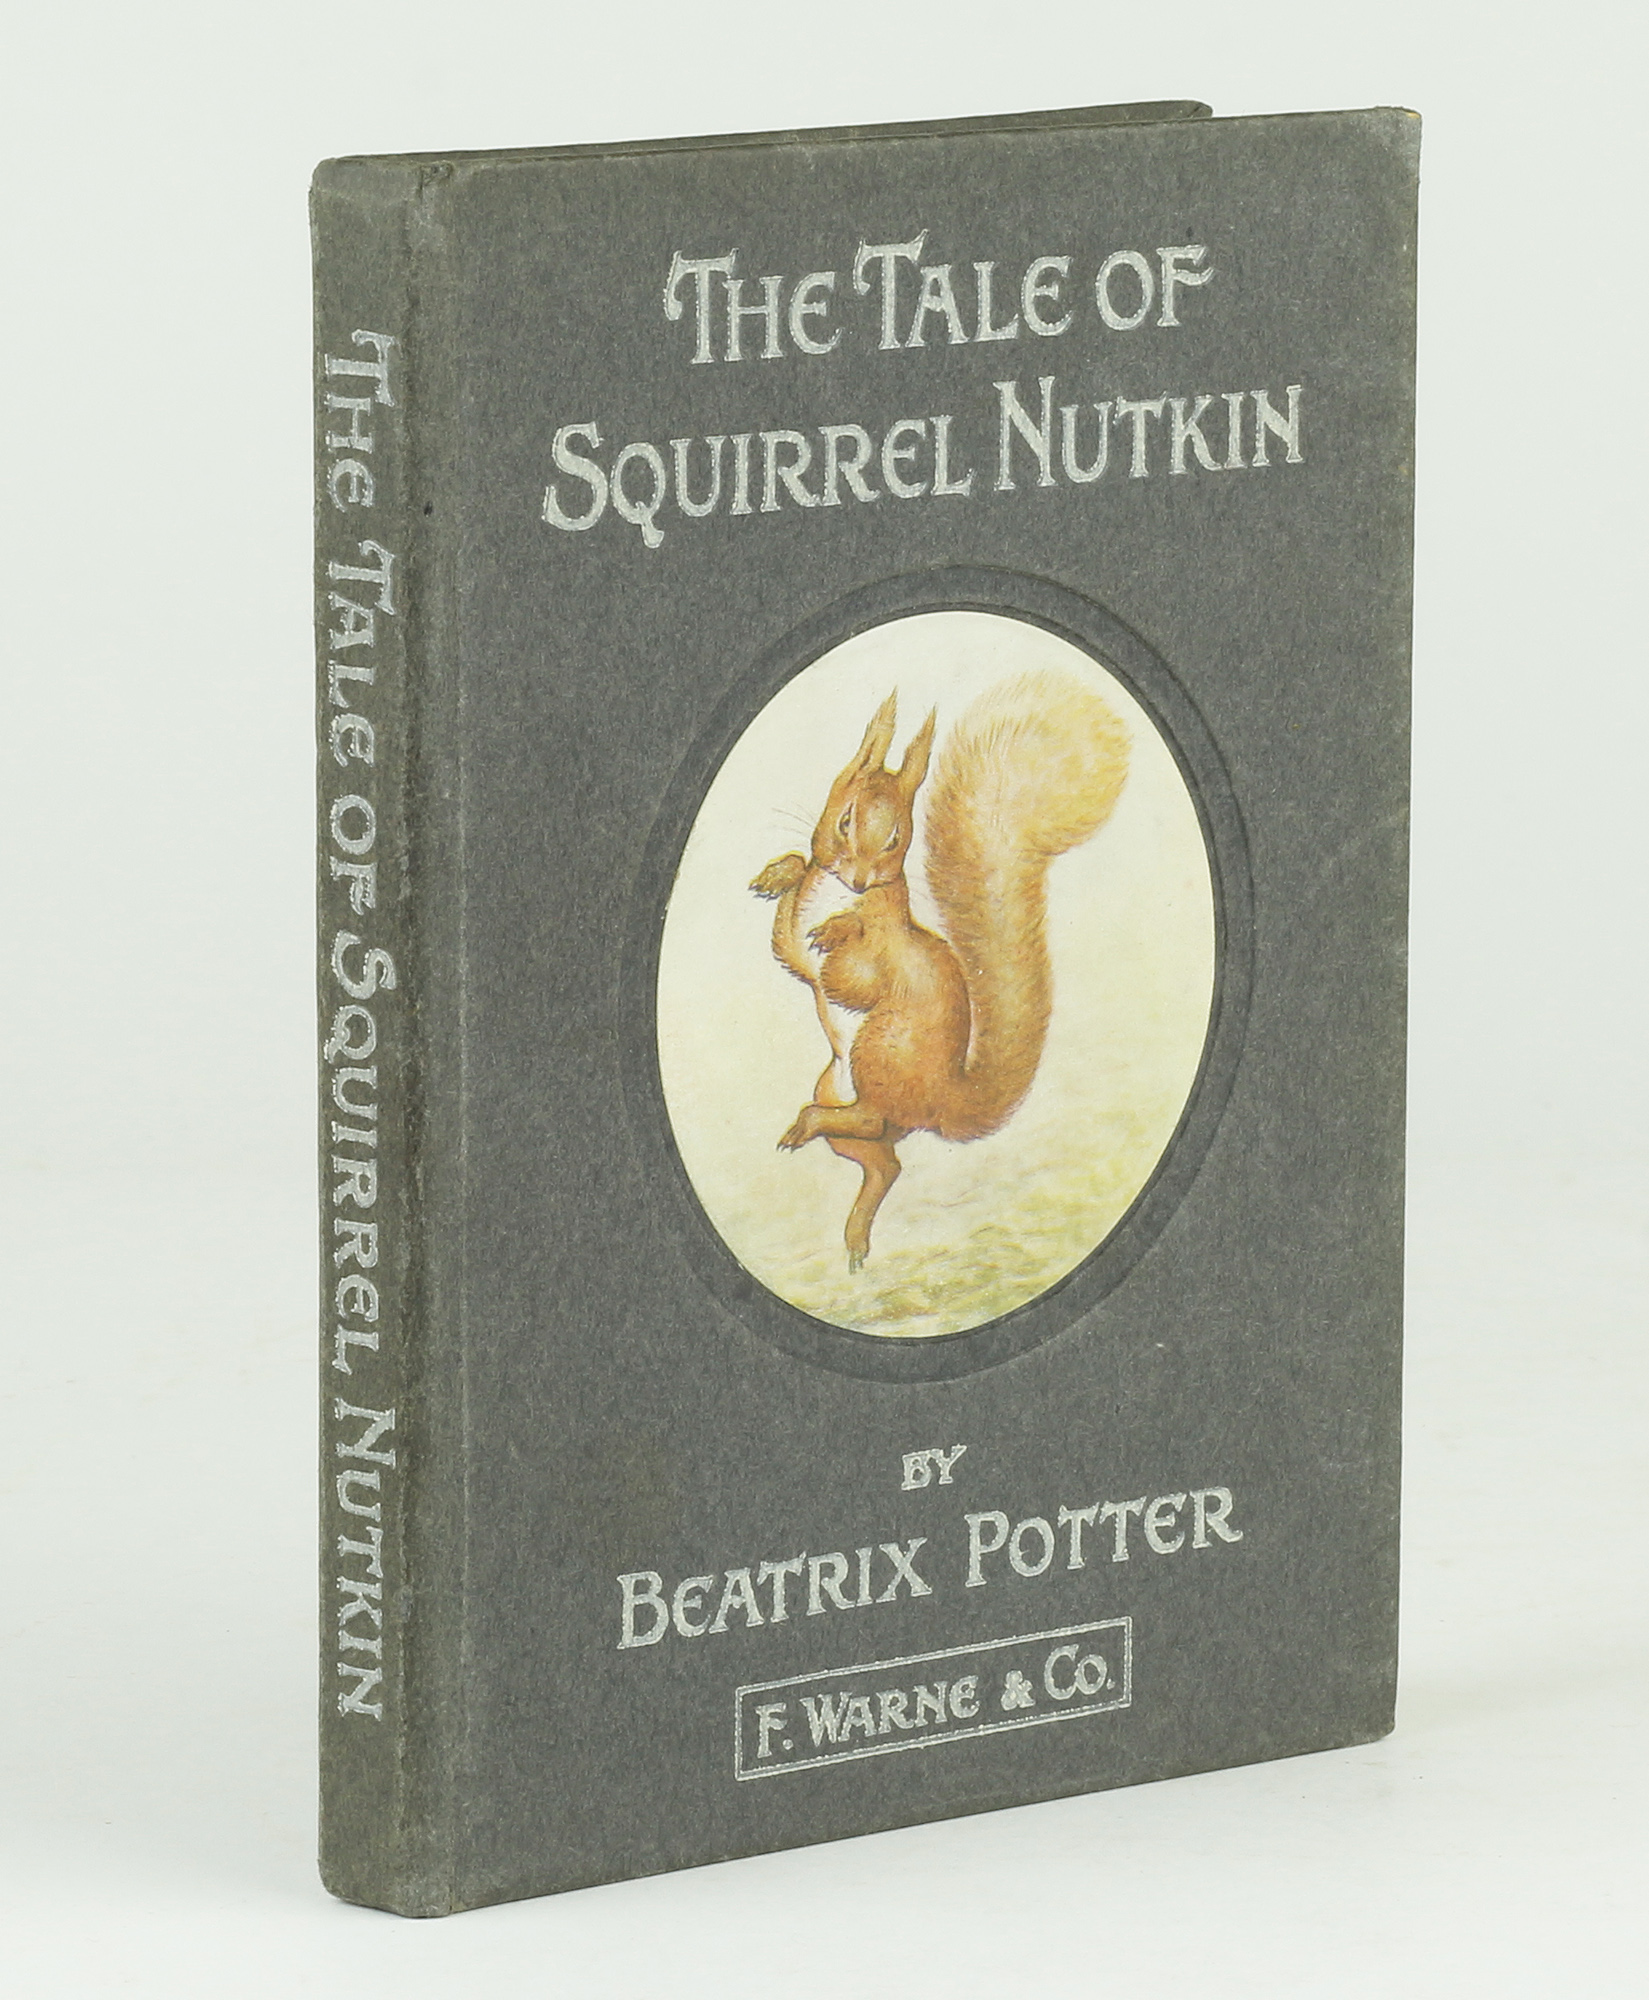 the tale of squirrel nutkin by beatrix potter